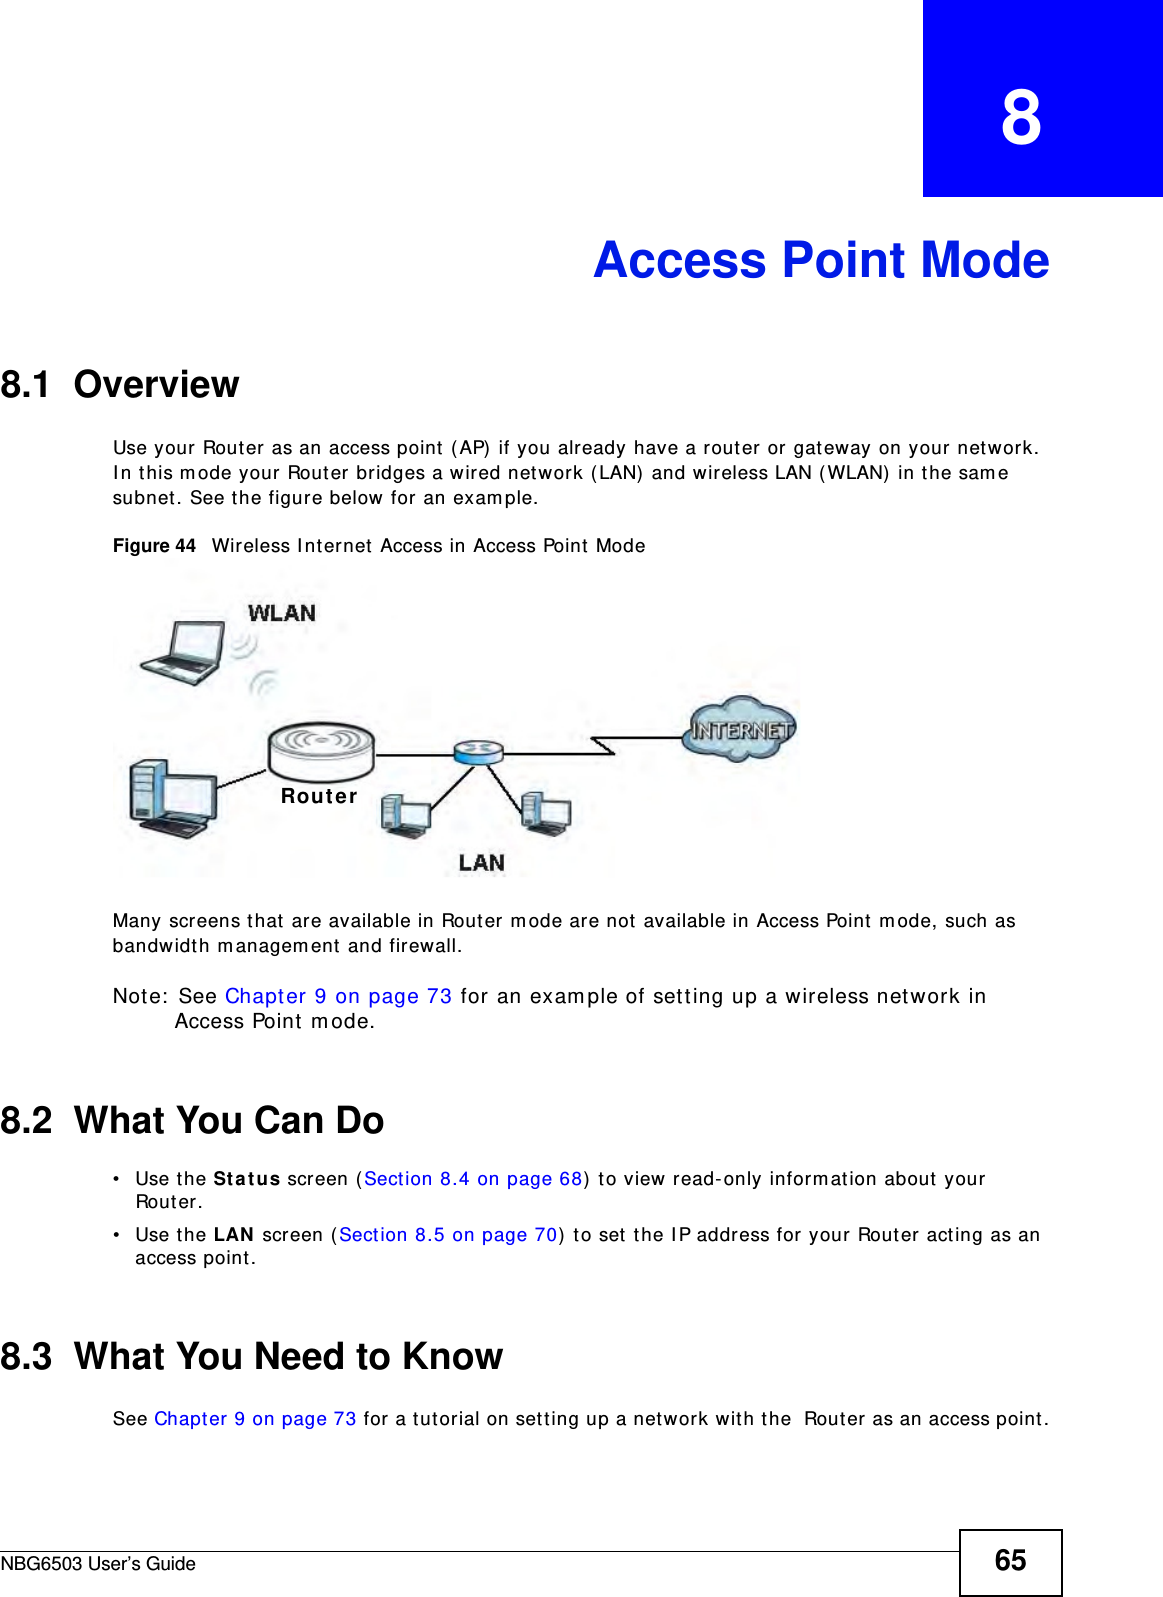 NBG6503 User’s Guide 65CHAPTER   8Access Point Mode8.1  OverviewUse your Router as an access point (AP) if you already have a router or gateway on your network. In this mode your Router bridges a wired network (LAN) and wireless LAN (WLAN) in the same subnet. See the figure below for an example.Figure 44   Wireless Internet Access in Access Point Mode Many screens that are available in Router mode are not available in Access Point mode, such as bandwidth management and firewall.Note: See Chapter 9 on page 73 for an example of setting up a wireless network in Access Point mode. 8.2  What You Can Do•Use the Status screen (Section 8.4 on page 68) to view read-only information about your Router.•Use the LAN screen (Section 8.5 on page 70) to set the IP address for your Router acting as an access point.8.3  What You Need to KnowSee Chapter 9 on page 73 for a tutorial on setting up a network with the  Router as an access point.Router